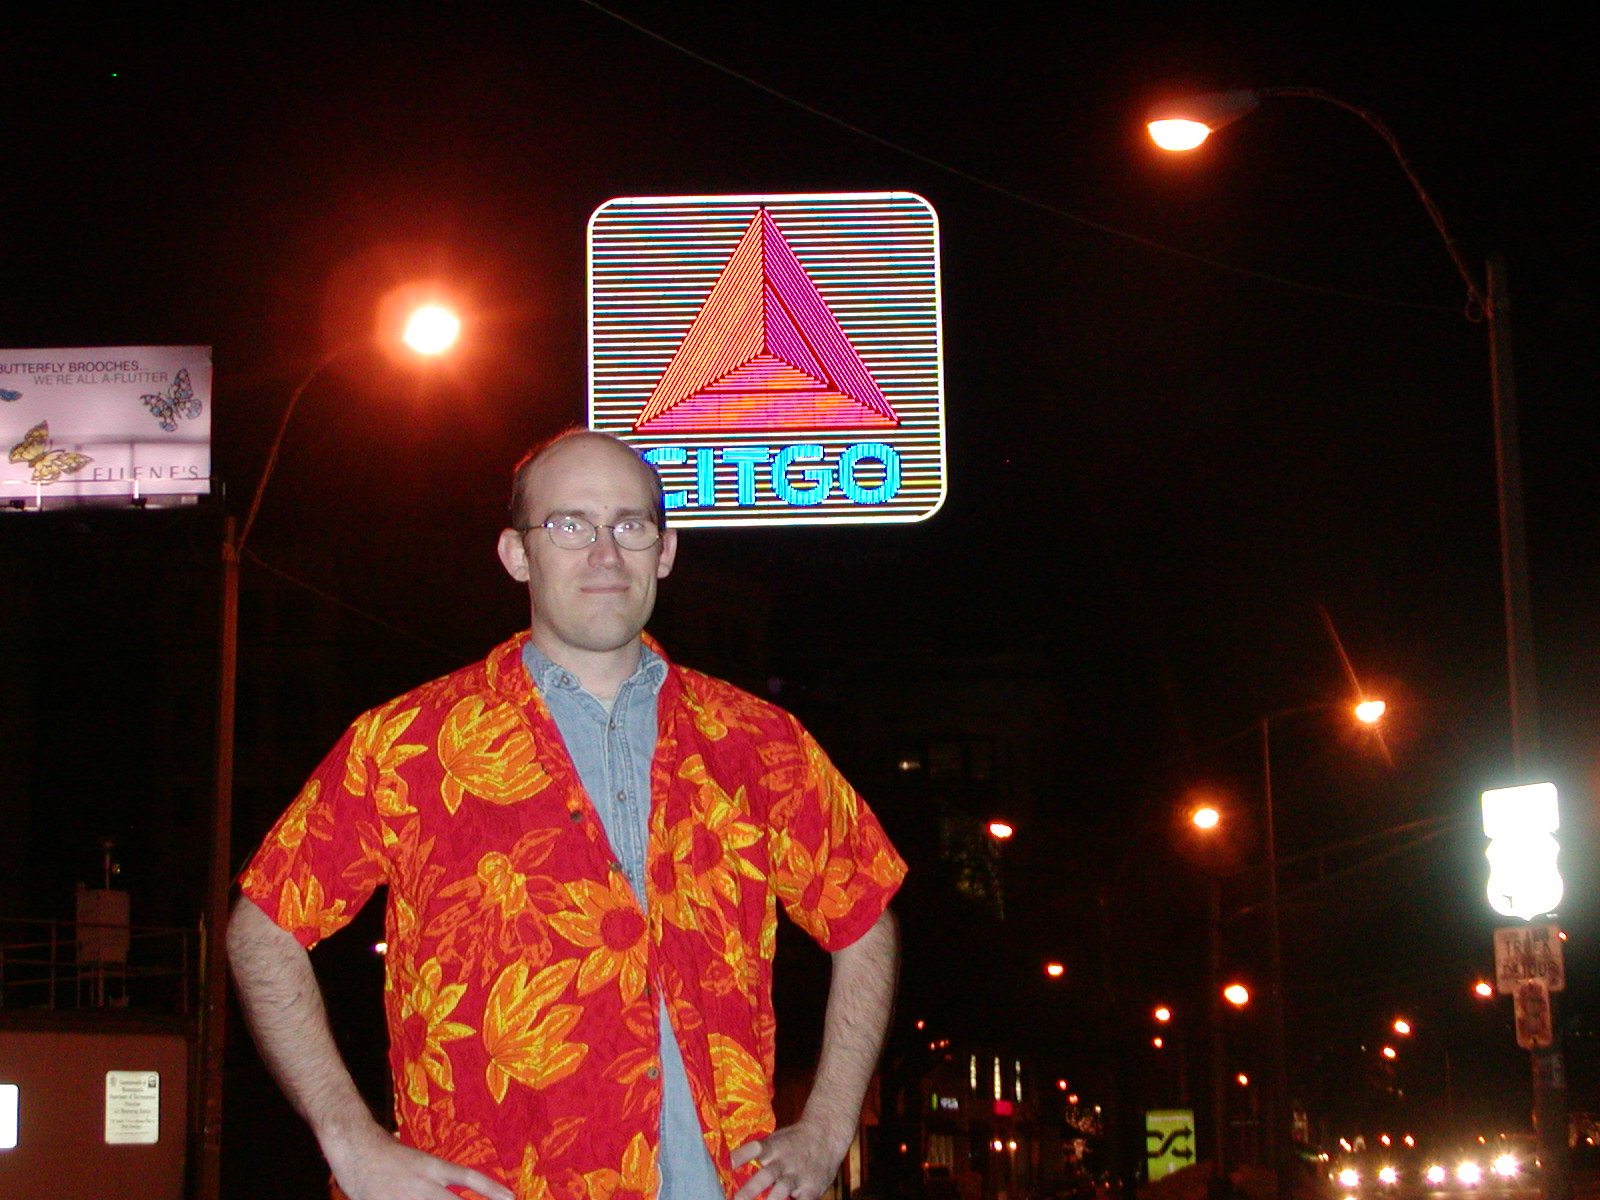 bdf in Schewern’s iconic shirt in front of Kenmore Square’s iconic sign in same color scheme